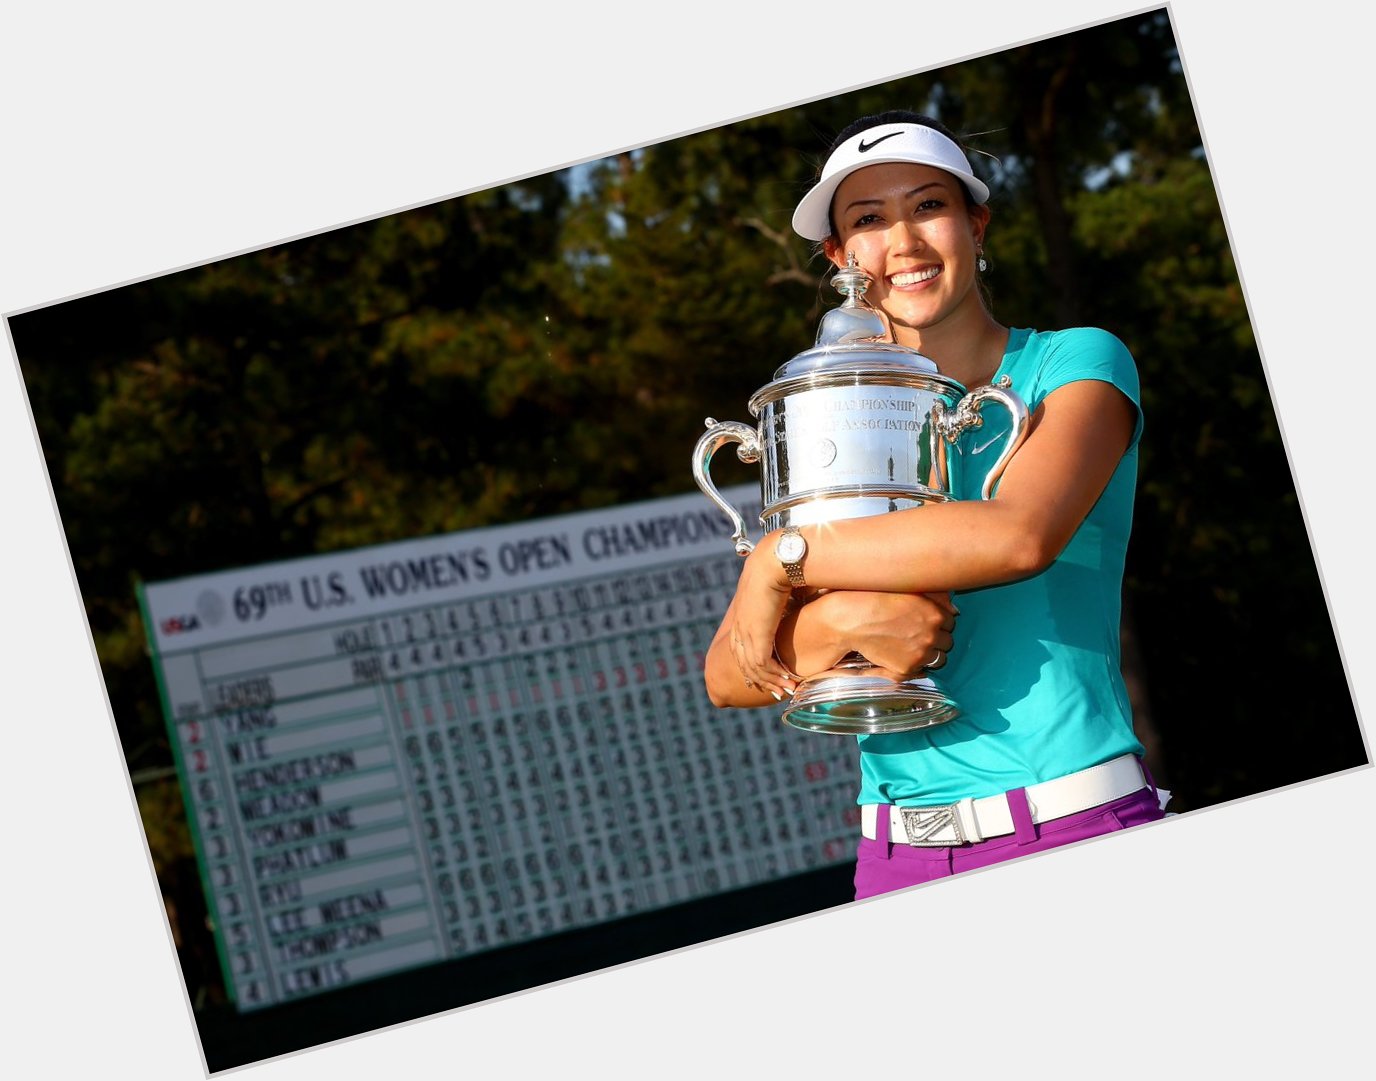 Happy birthday to Michelle Wie, born in in 1989 - she started playing golf when she was just ten! 